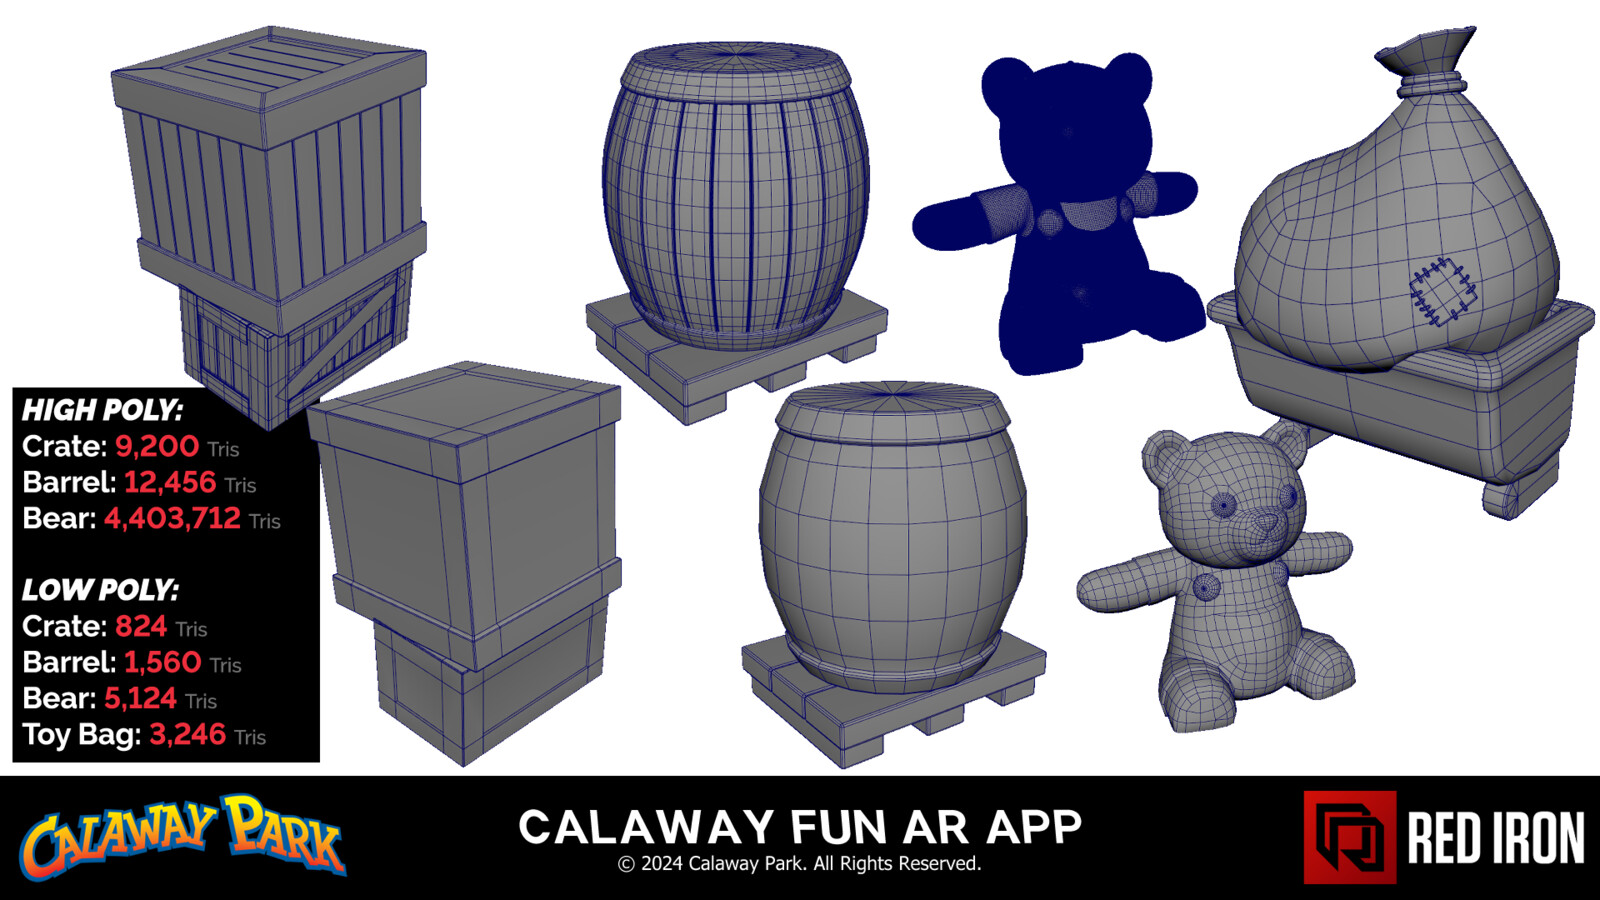 Wireframes and polycounts for high and low poly models.